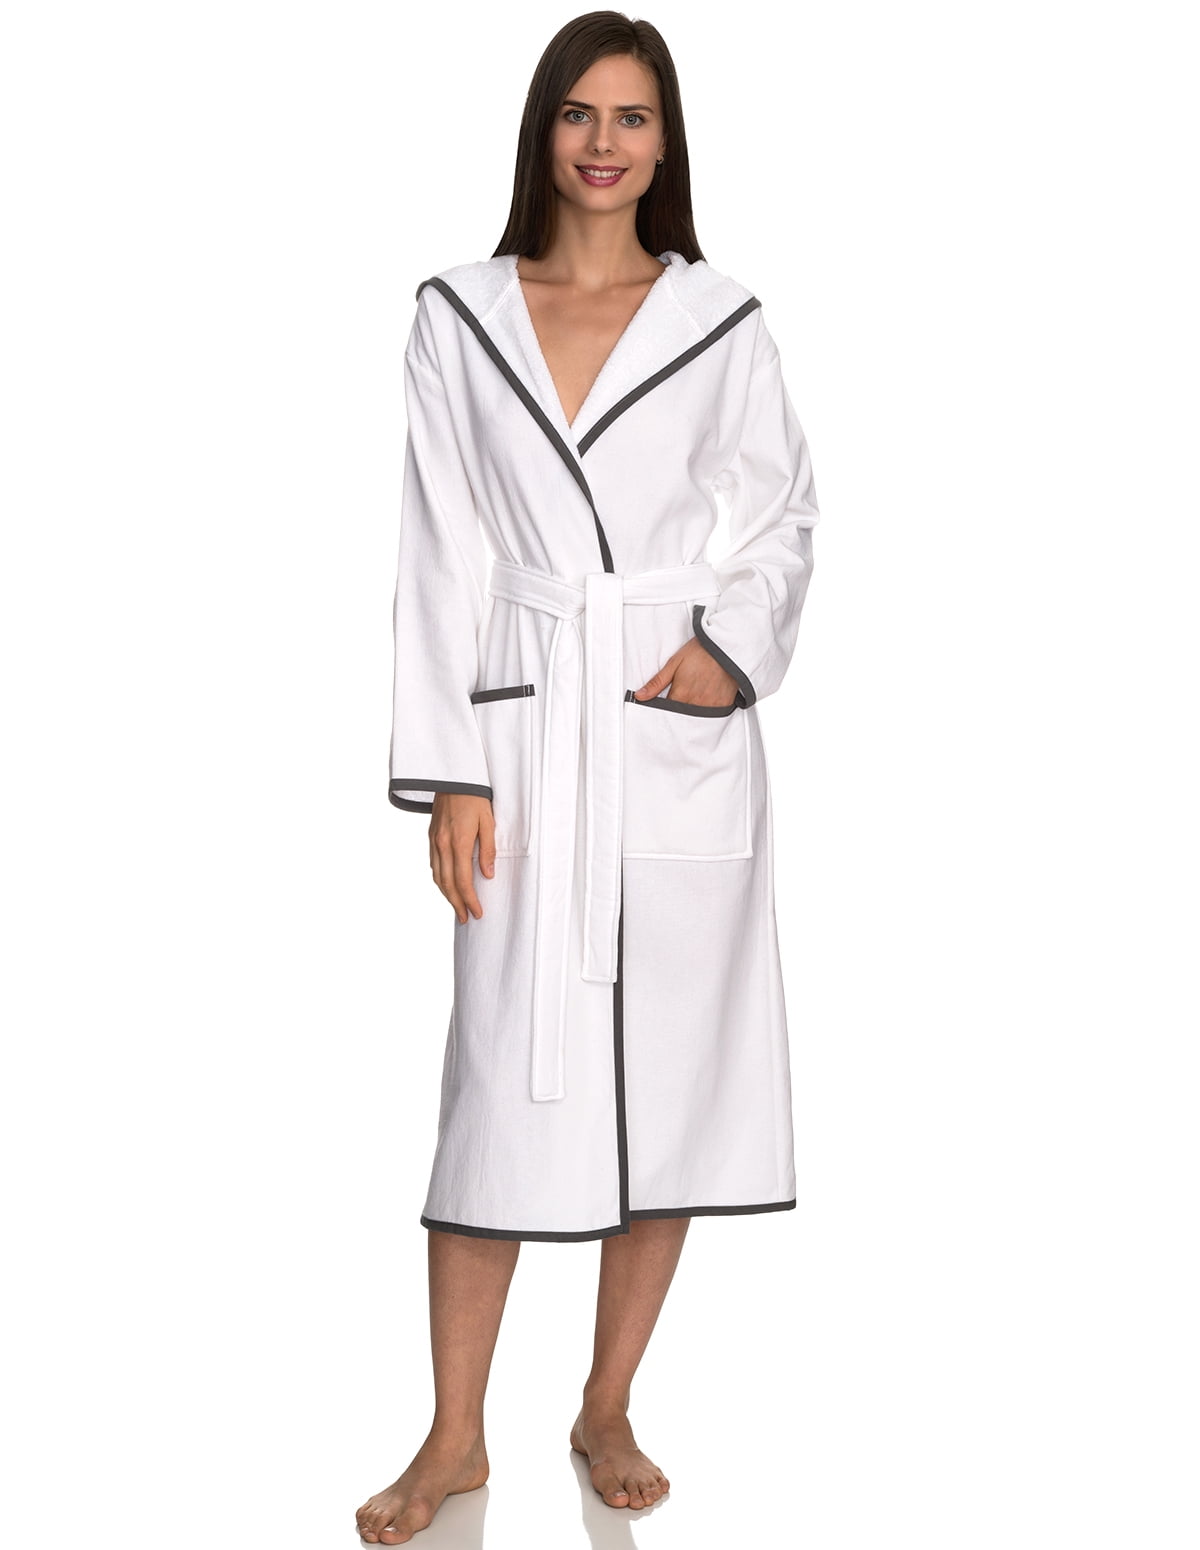 TowelSelections - TowelSelections Women's Robe, Cotton Lined Hooded ...